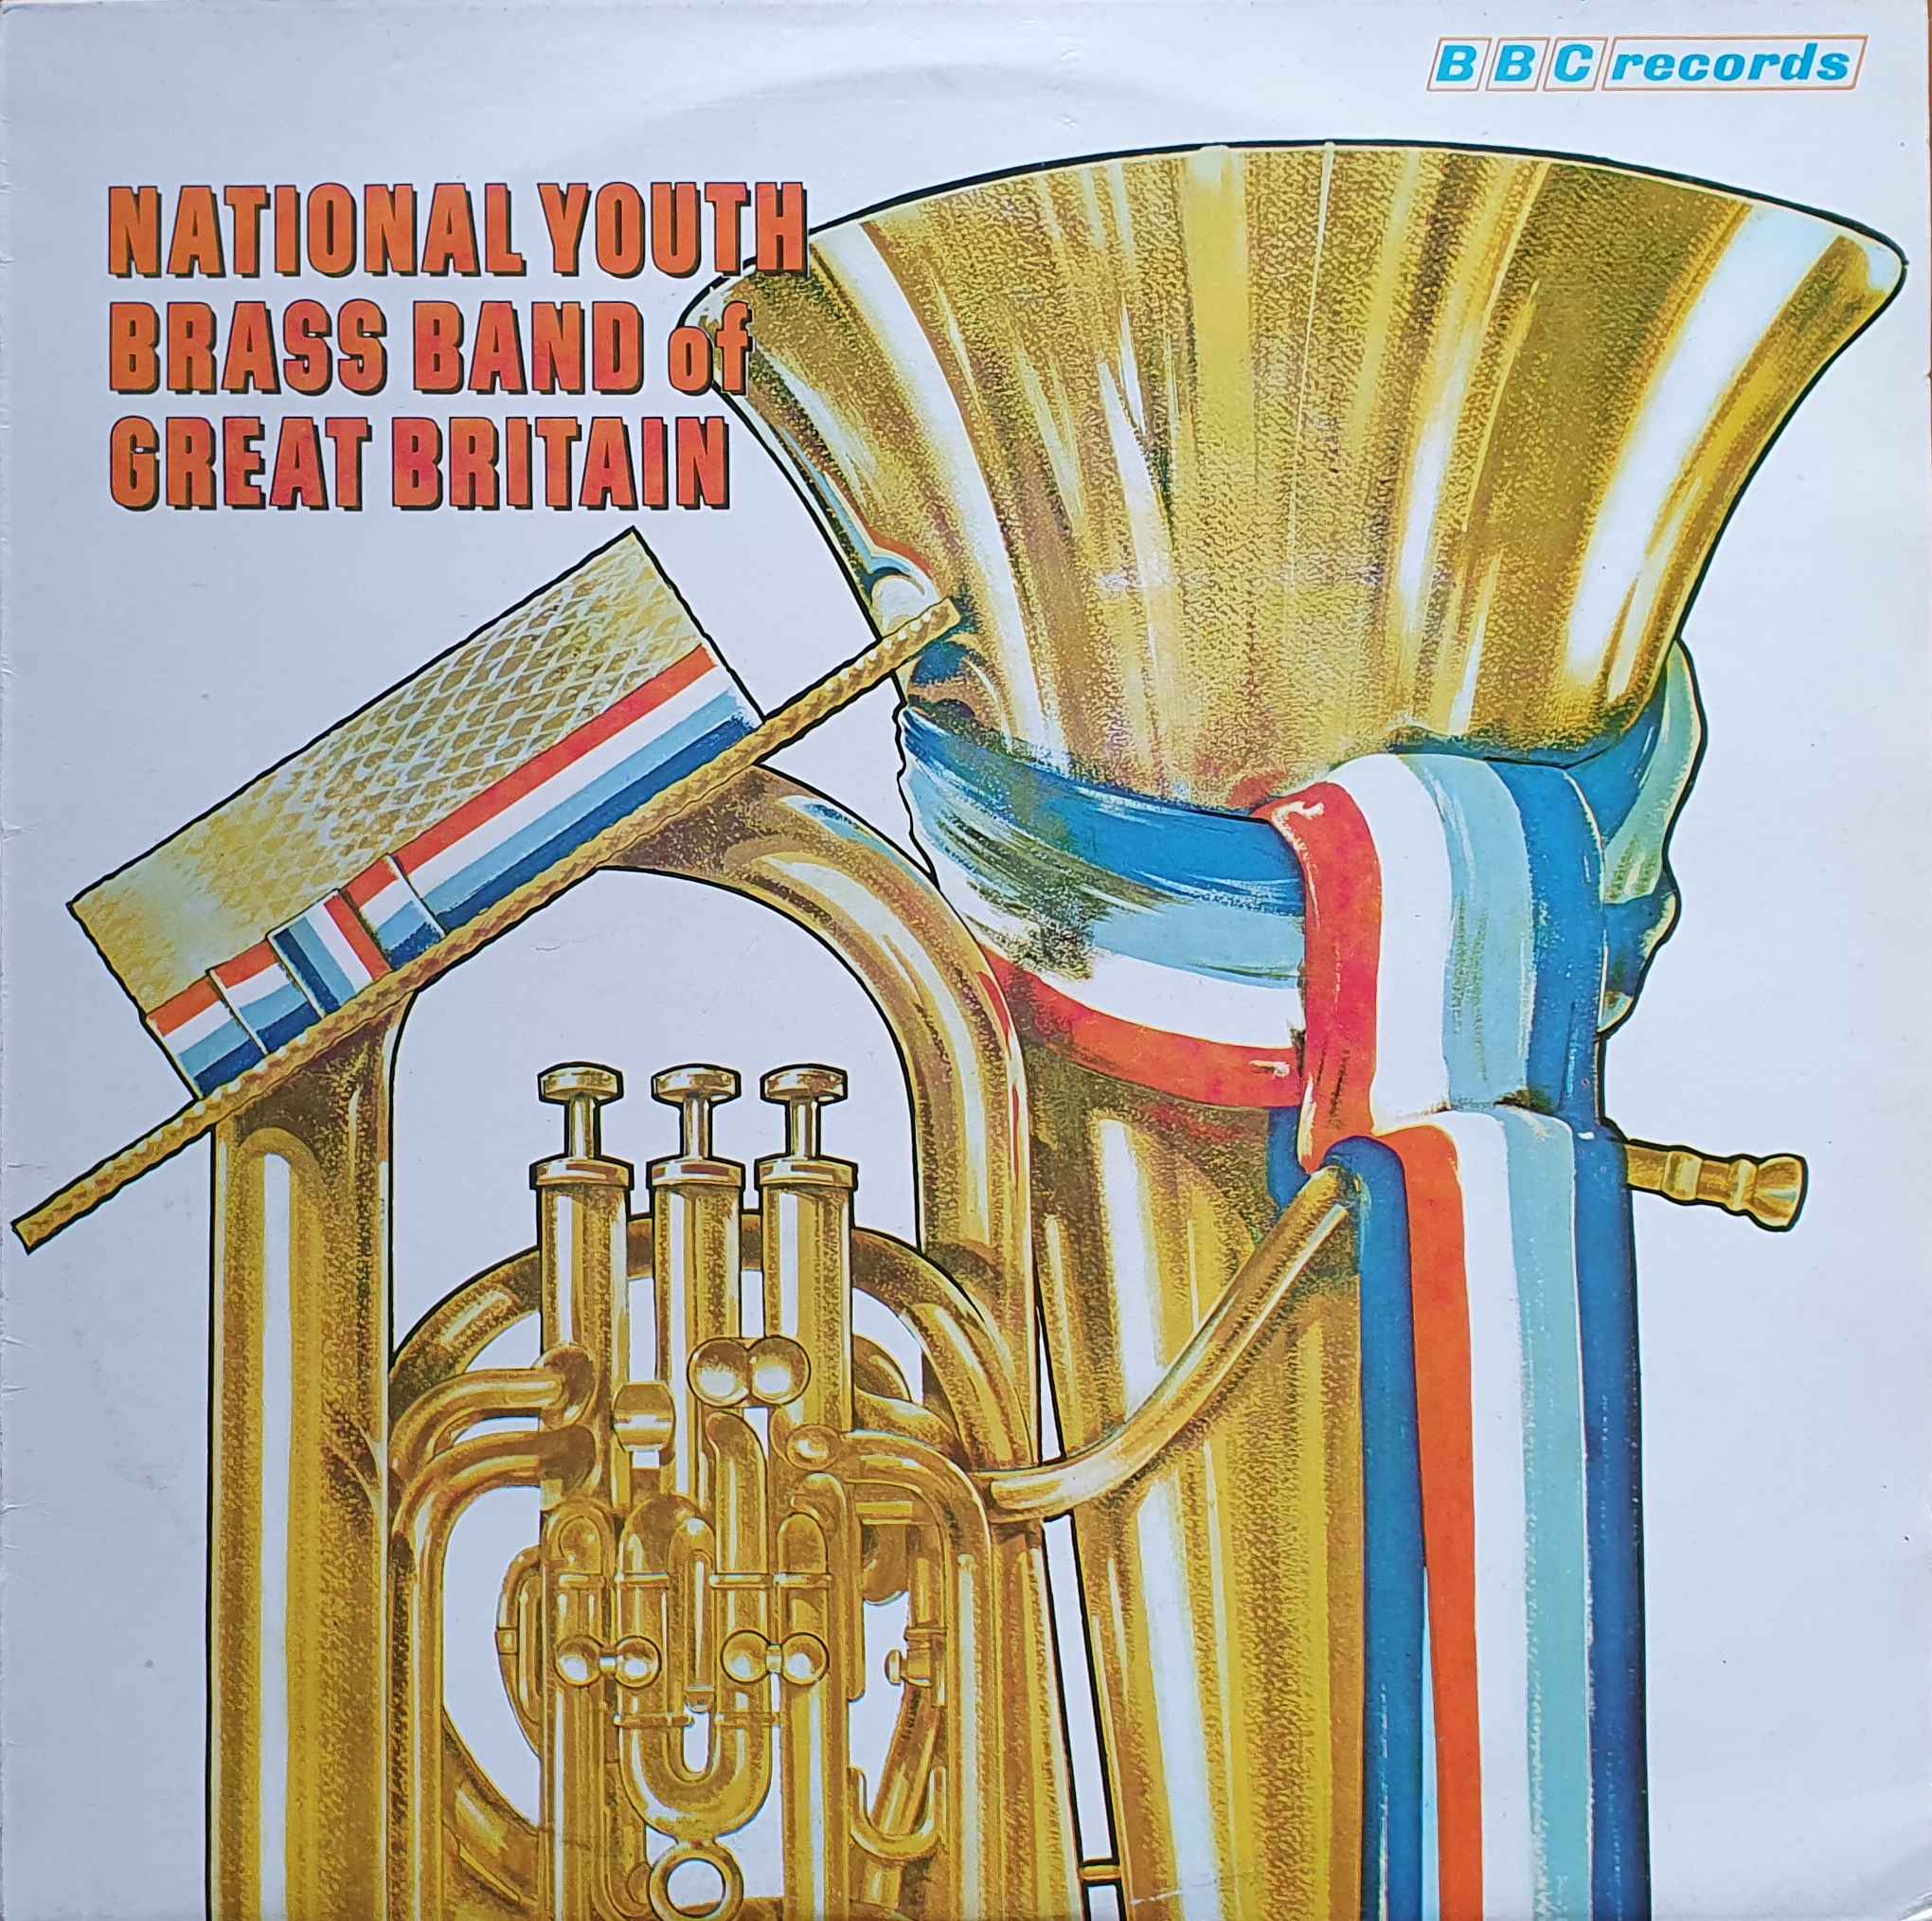 Picture of REC 38 National youth brass band of Great Britain by artist Various from the BBC albums - Records and Tapes library